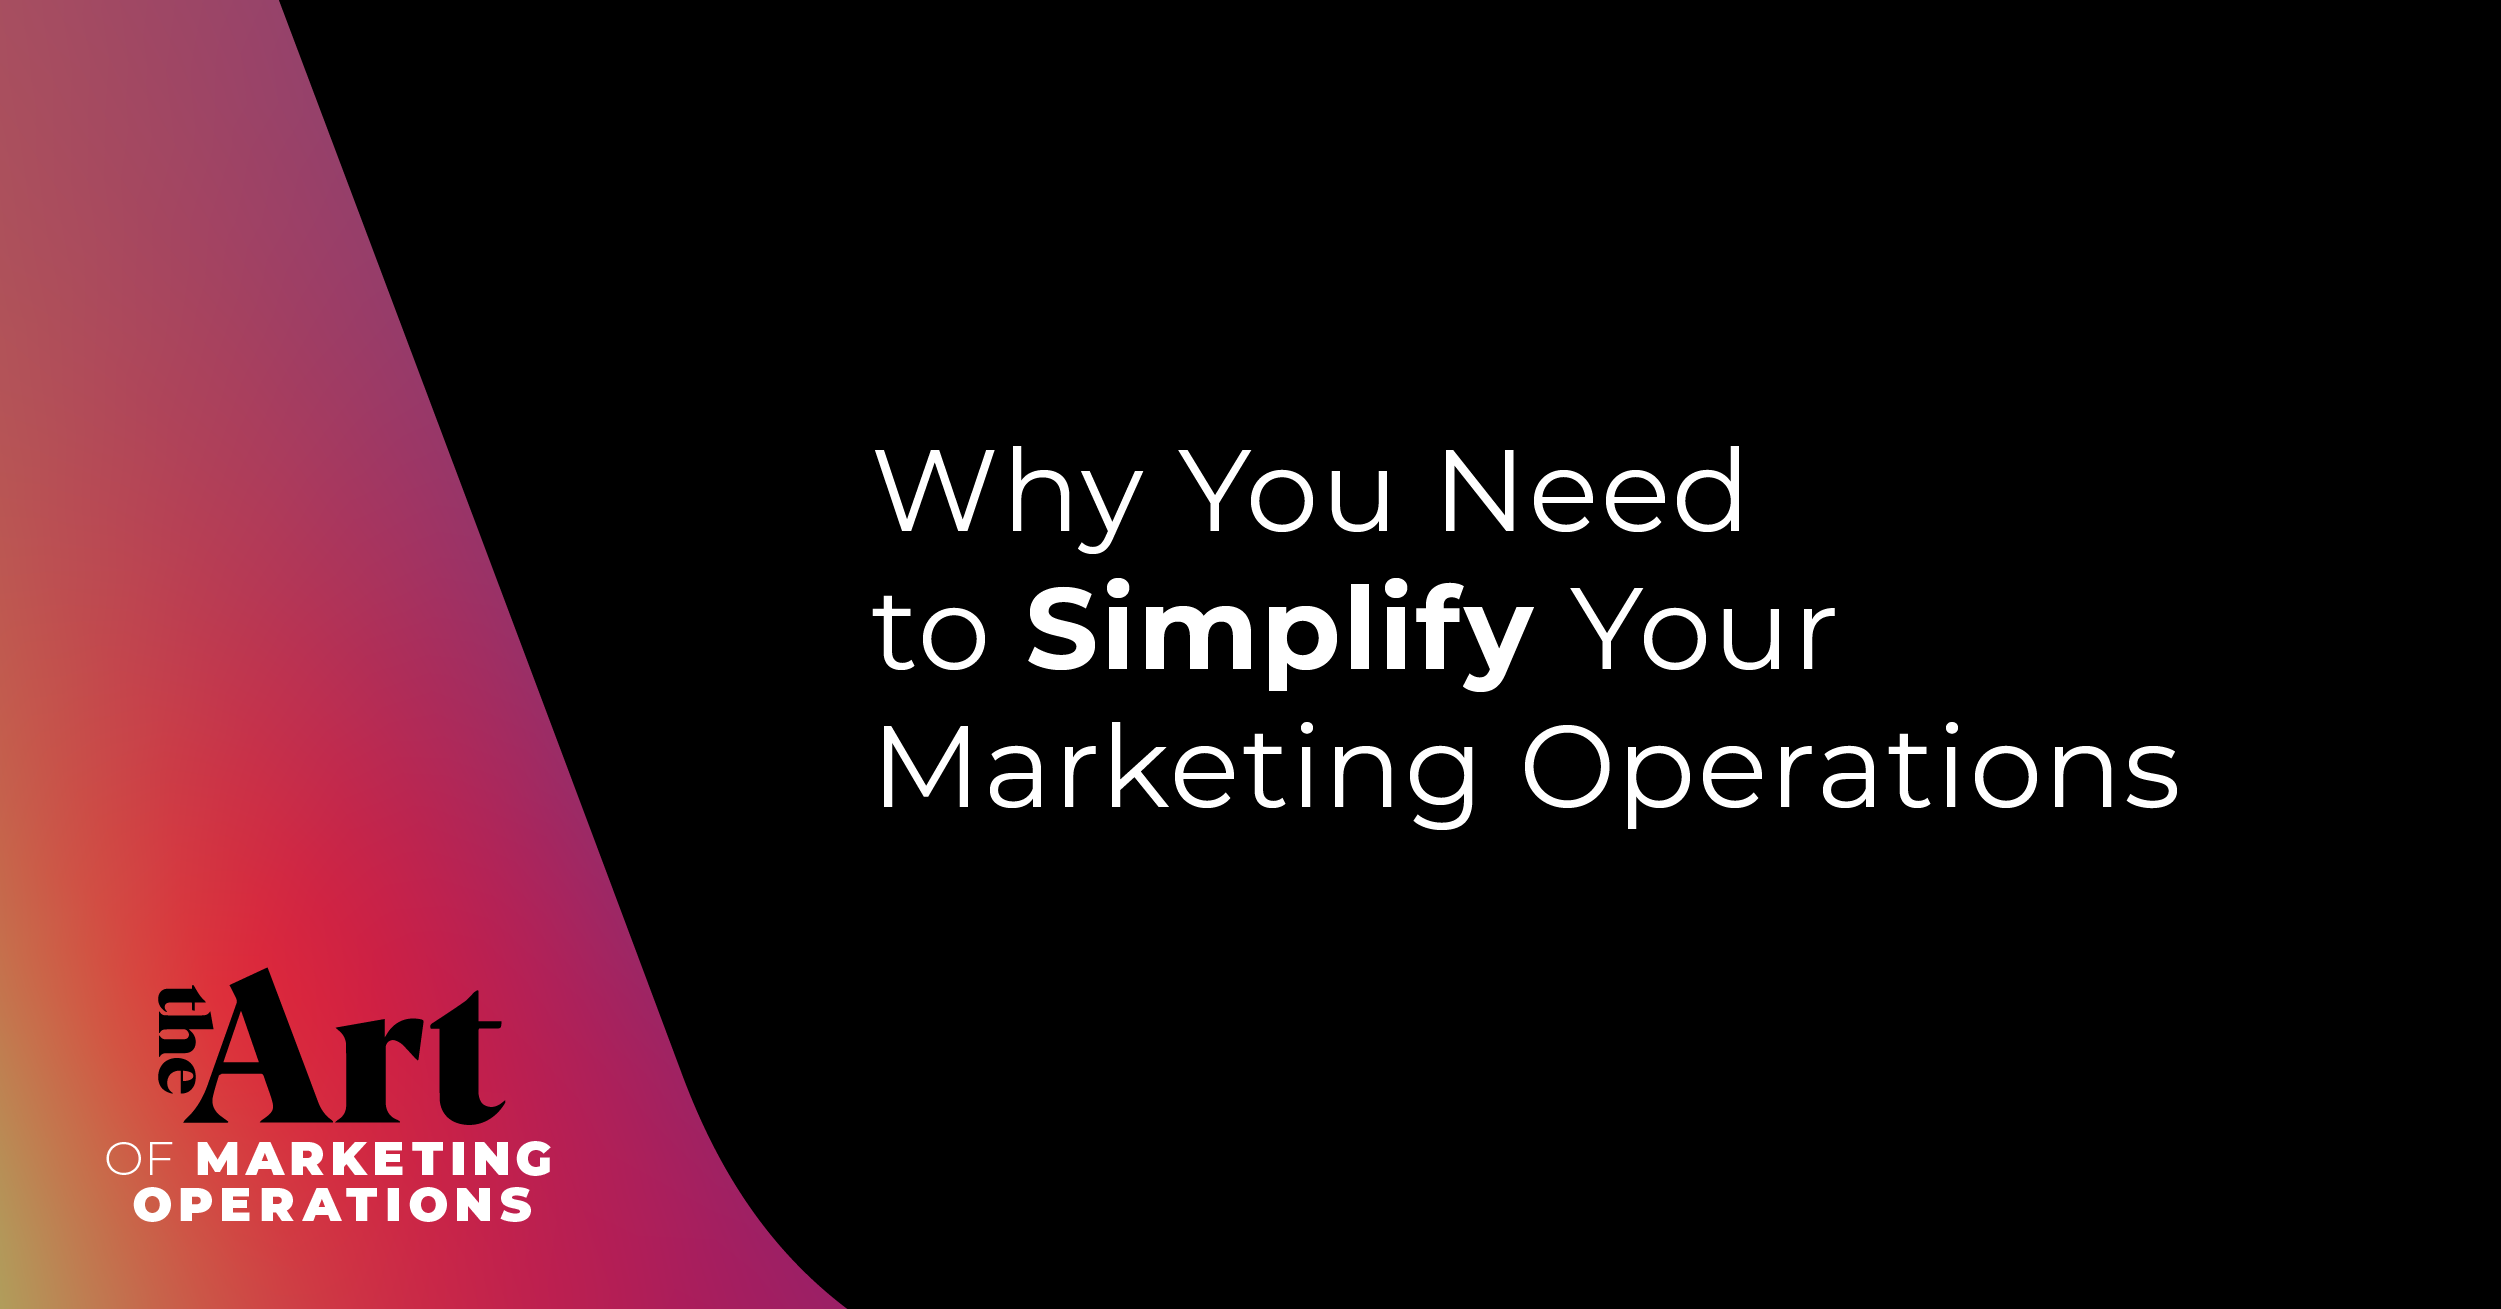 Why You Need to Simply Your Marketing Operations